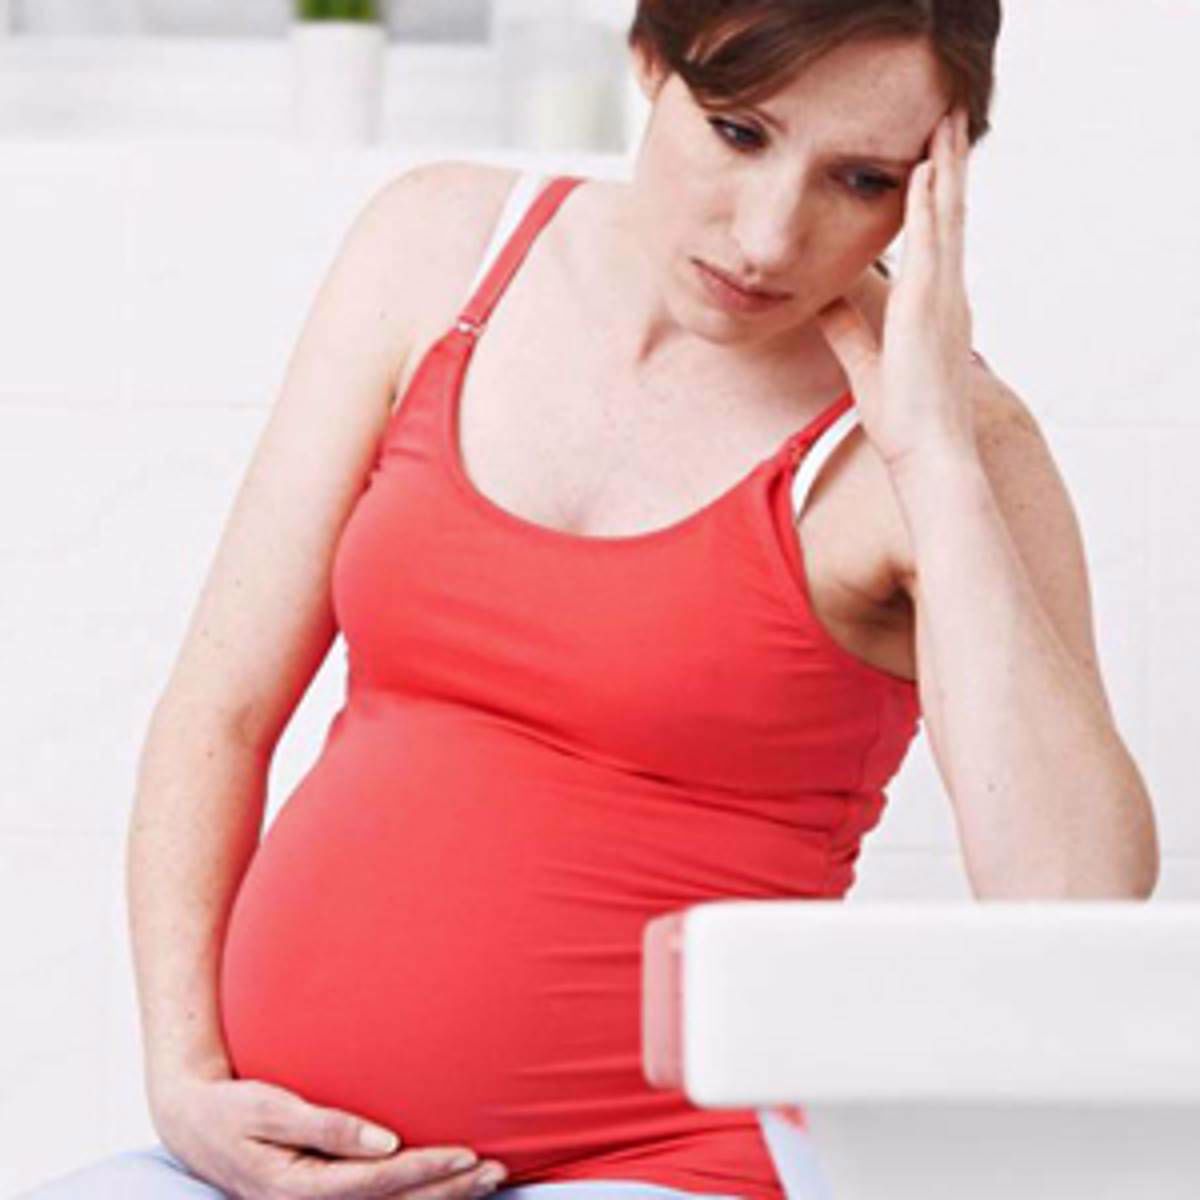 How Can I Eat Healthily During Pregnancy?